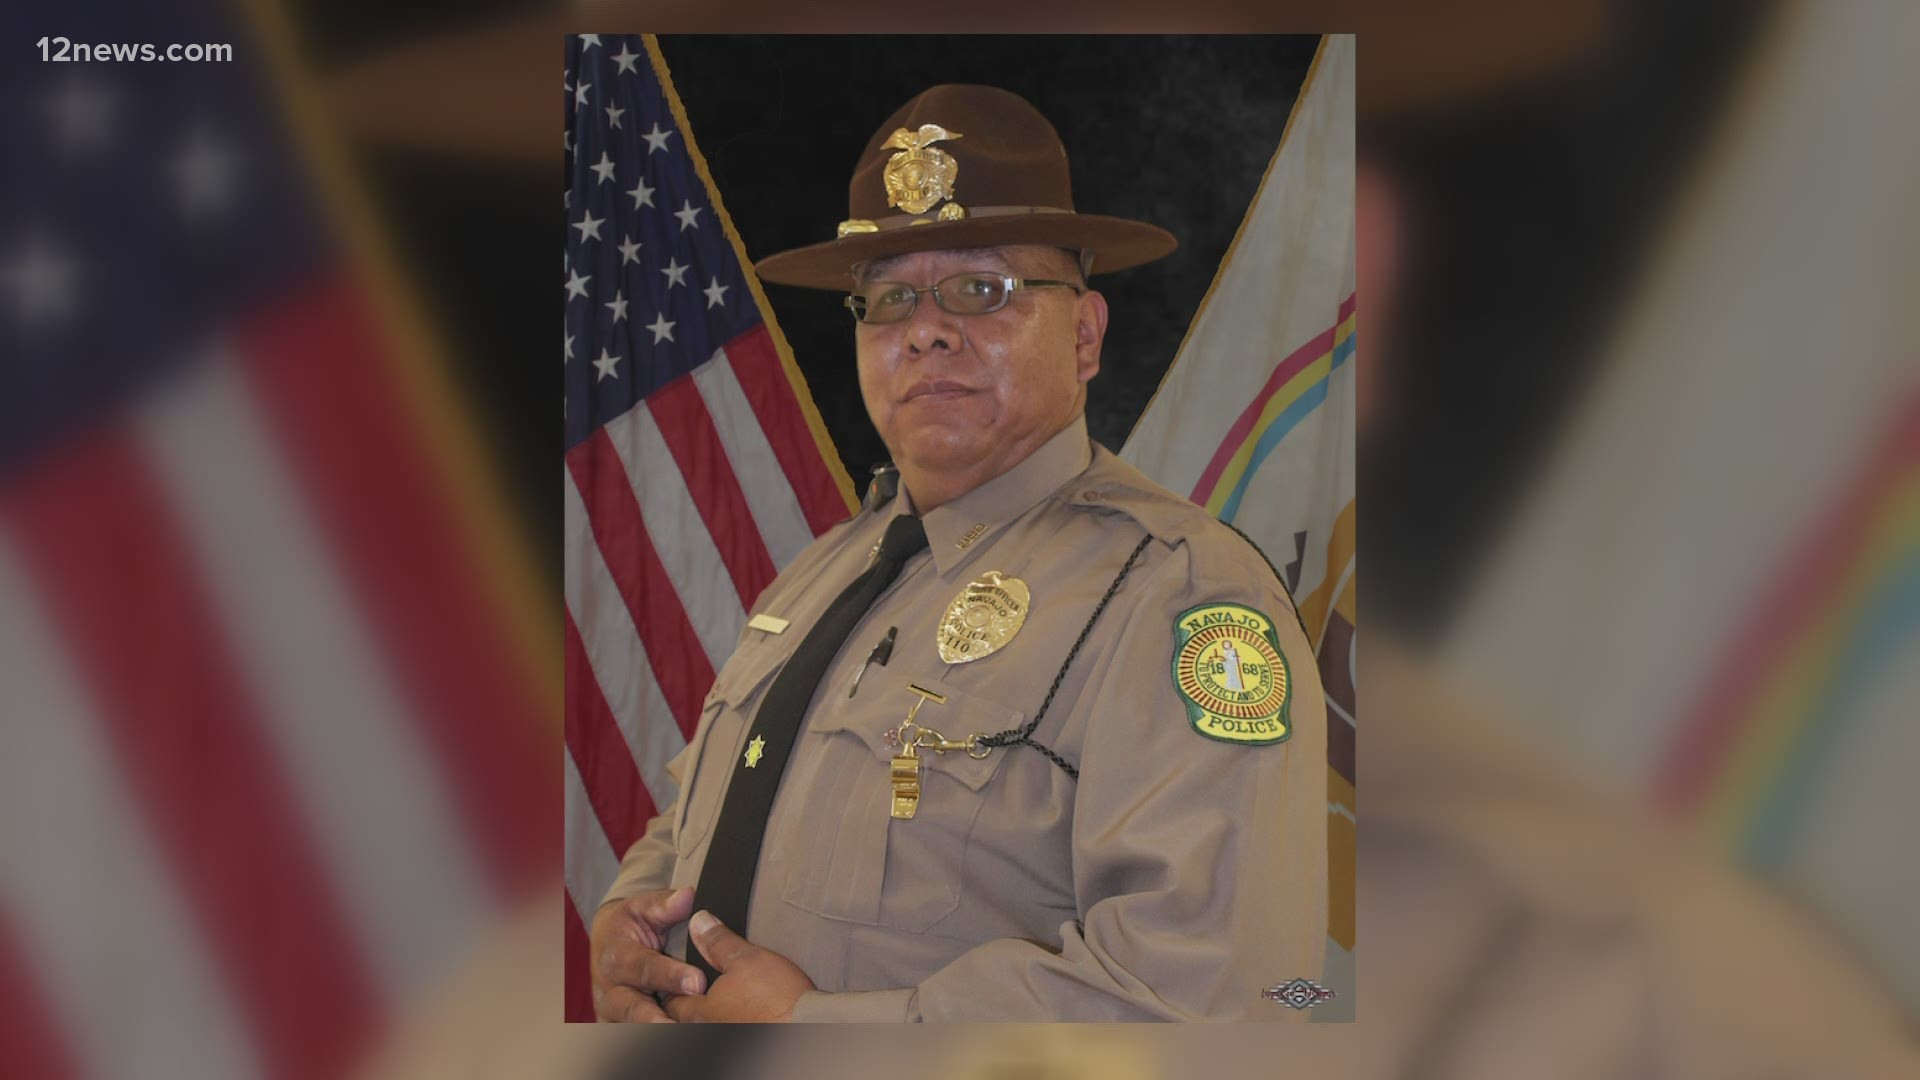 Navajo Police Officer Michael Lee died Friday morning from COVID-19. Lee was working on the frontlines of the pandmic.